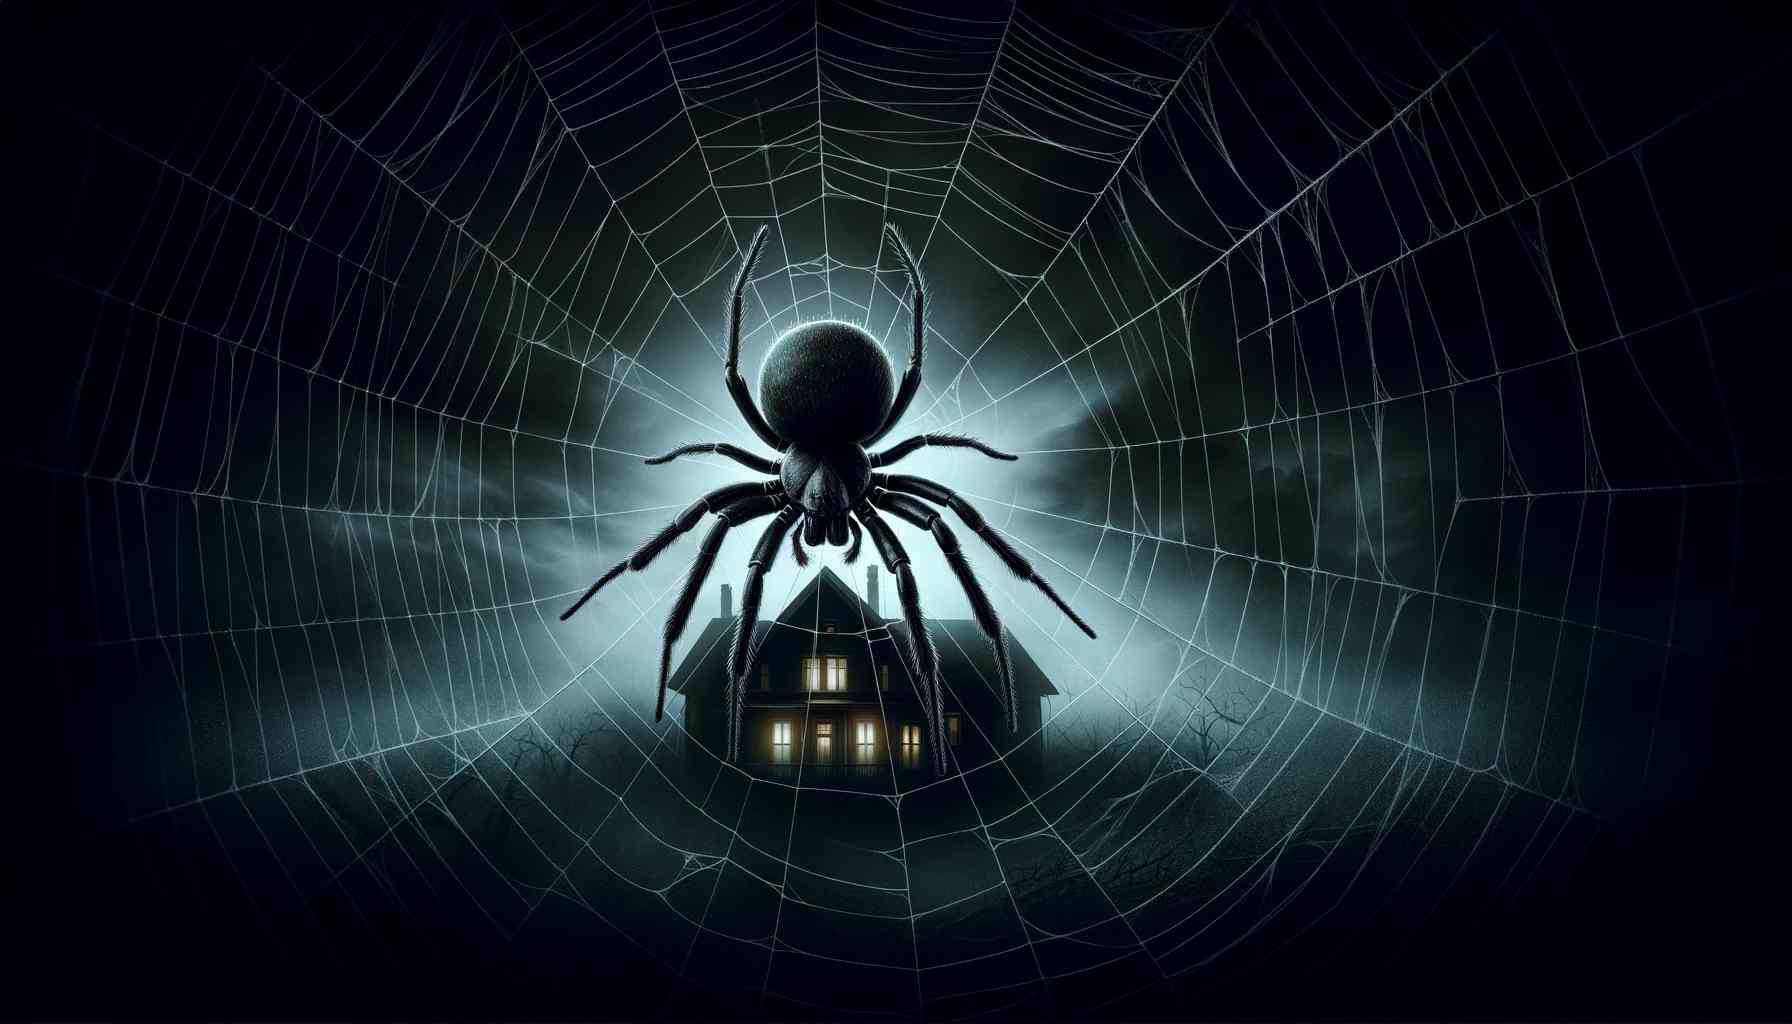 Are black house spiders poisonous